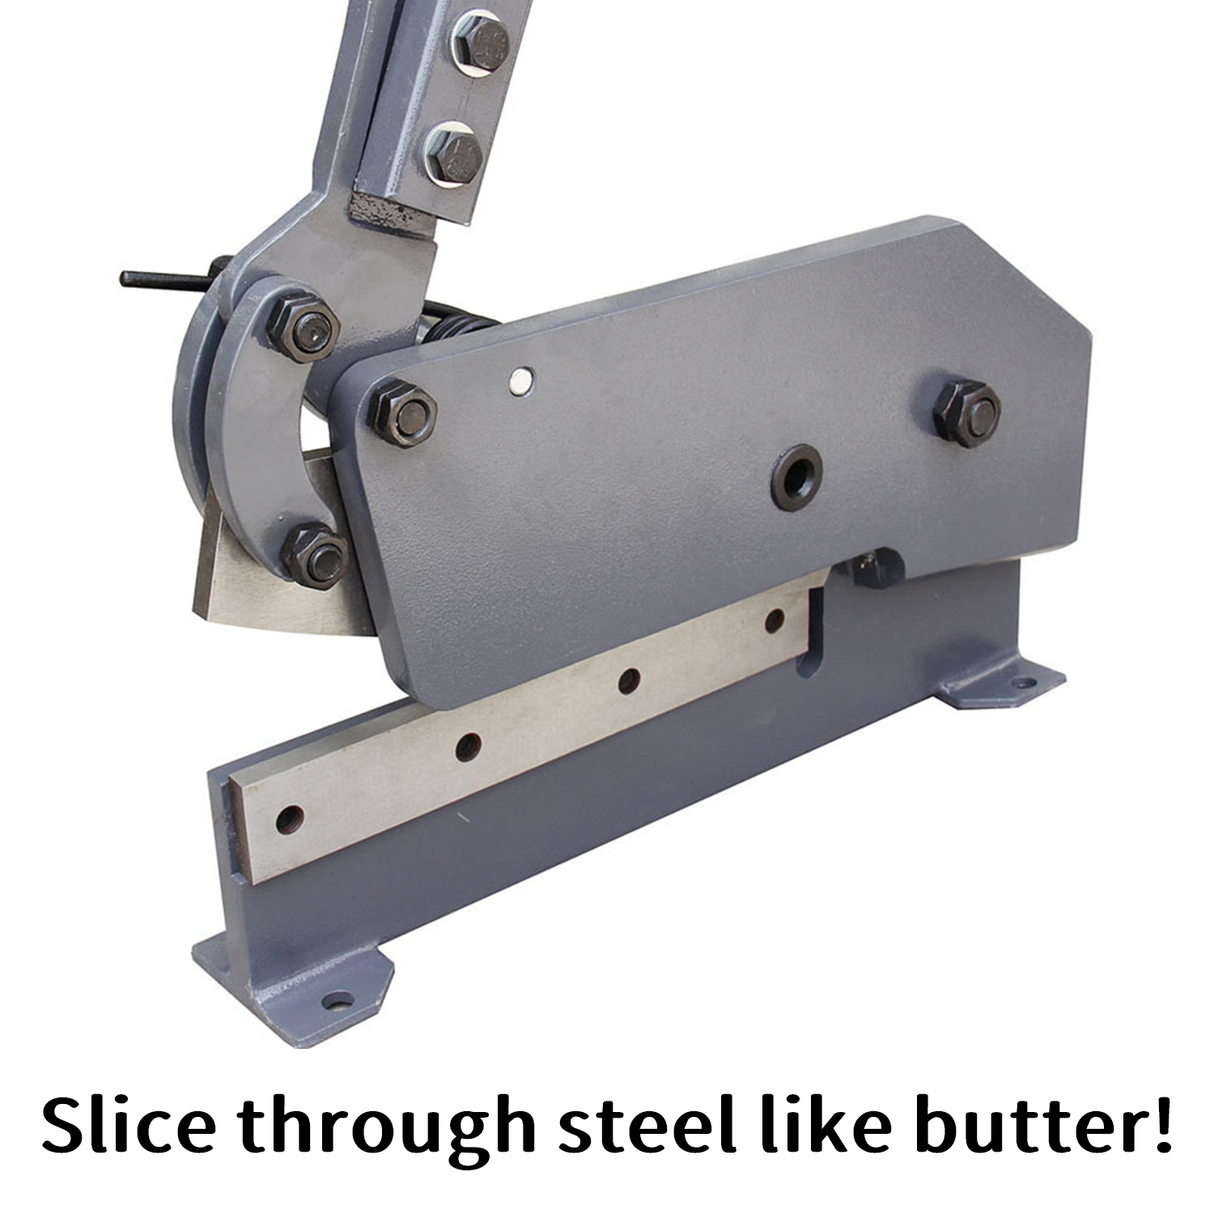 Heavy Duty Steel Frame Guarantees Stability and Safety During Cutting Process - Designed for Long-Term Usage